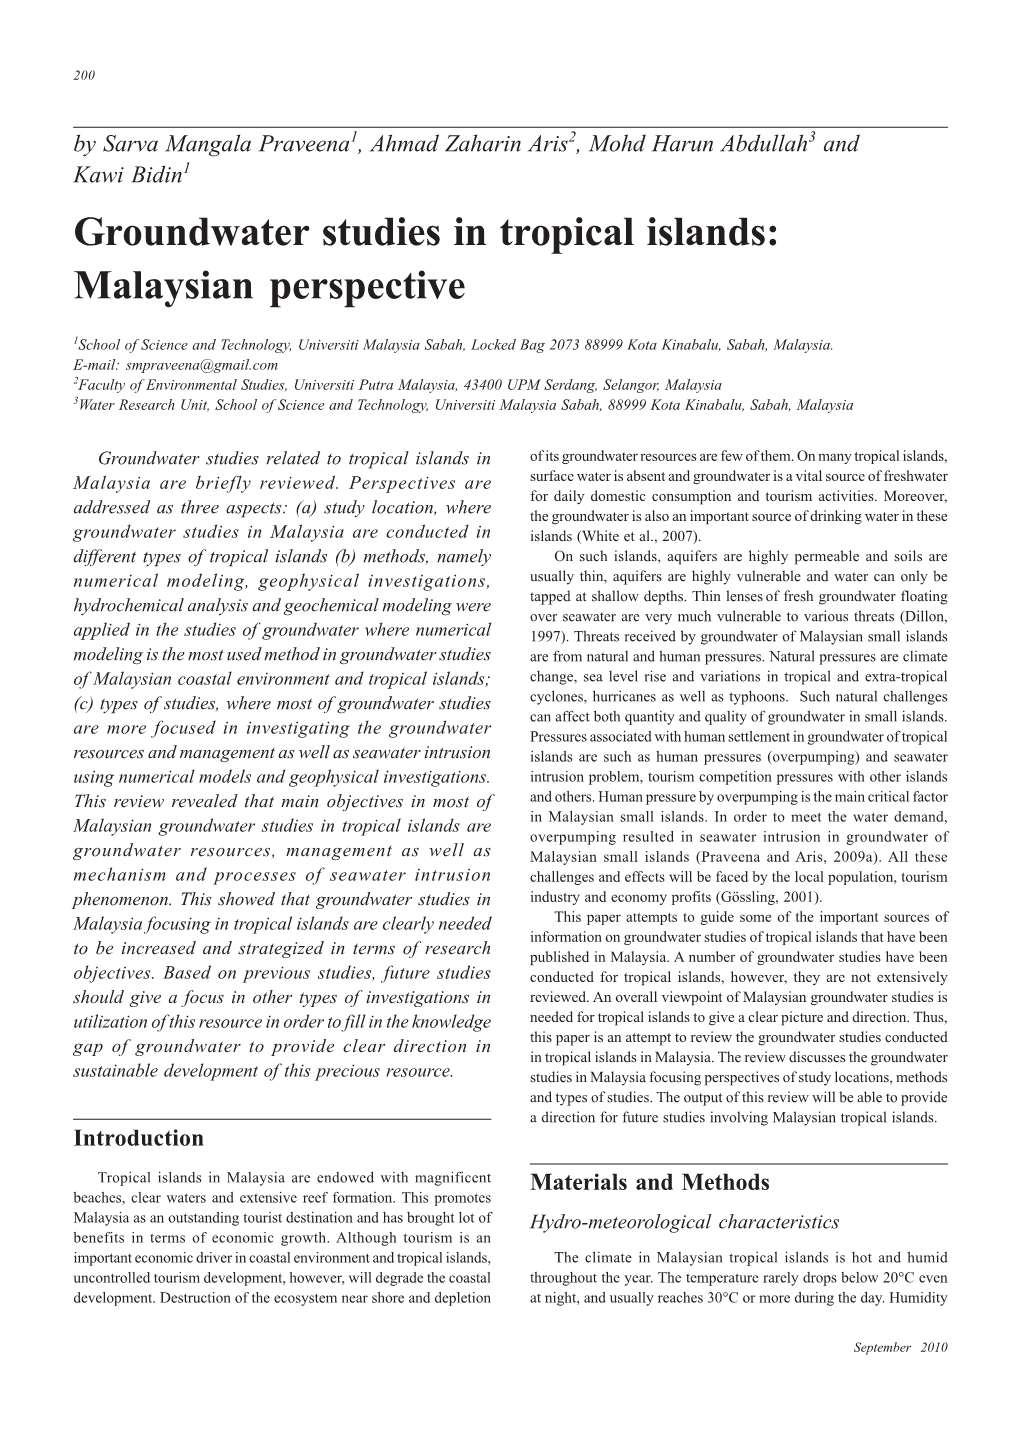 Groundwater Studies in Tropical Islands: Malaysian Perspective